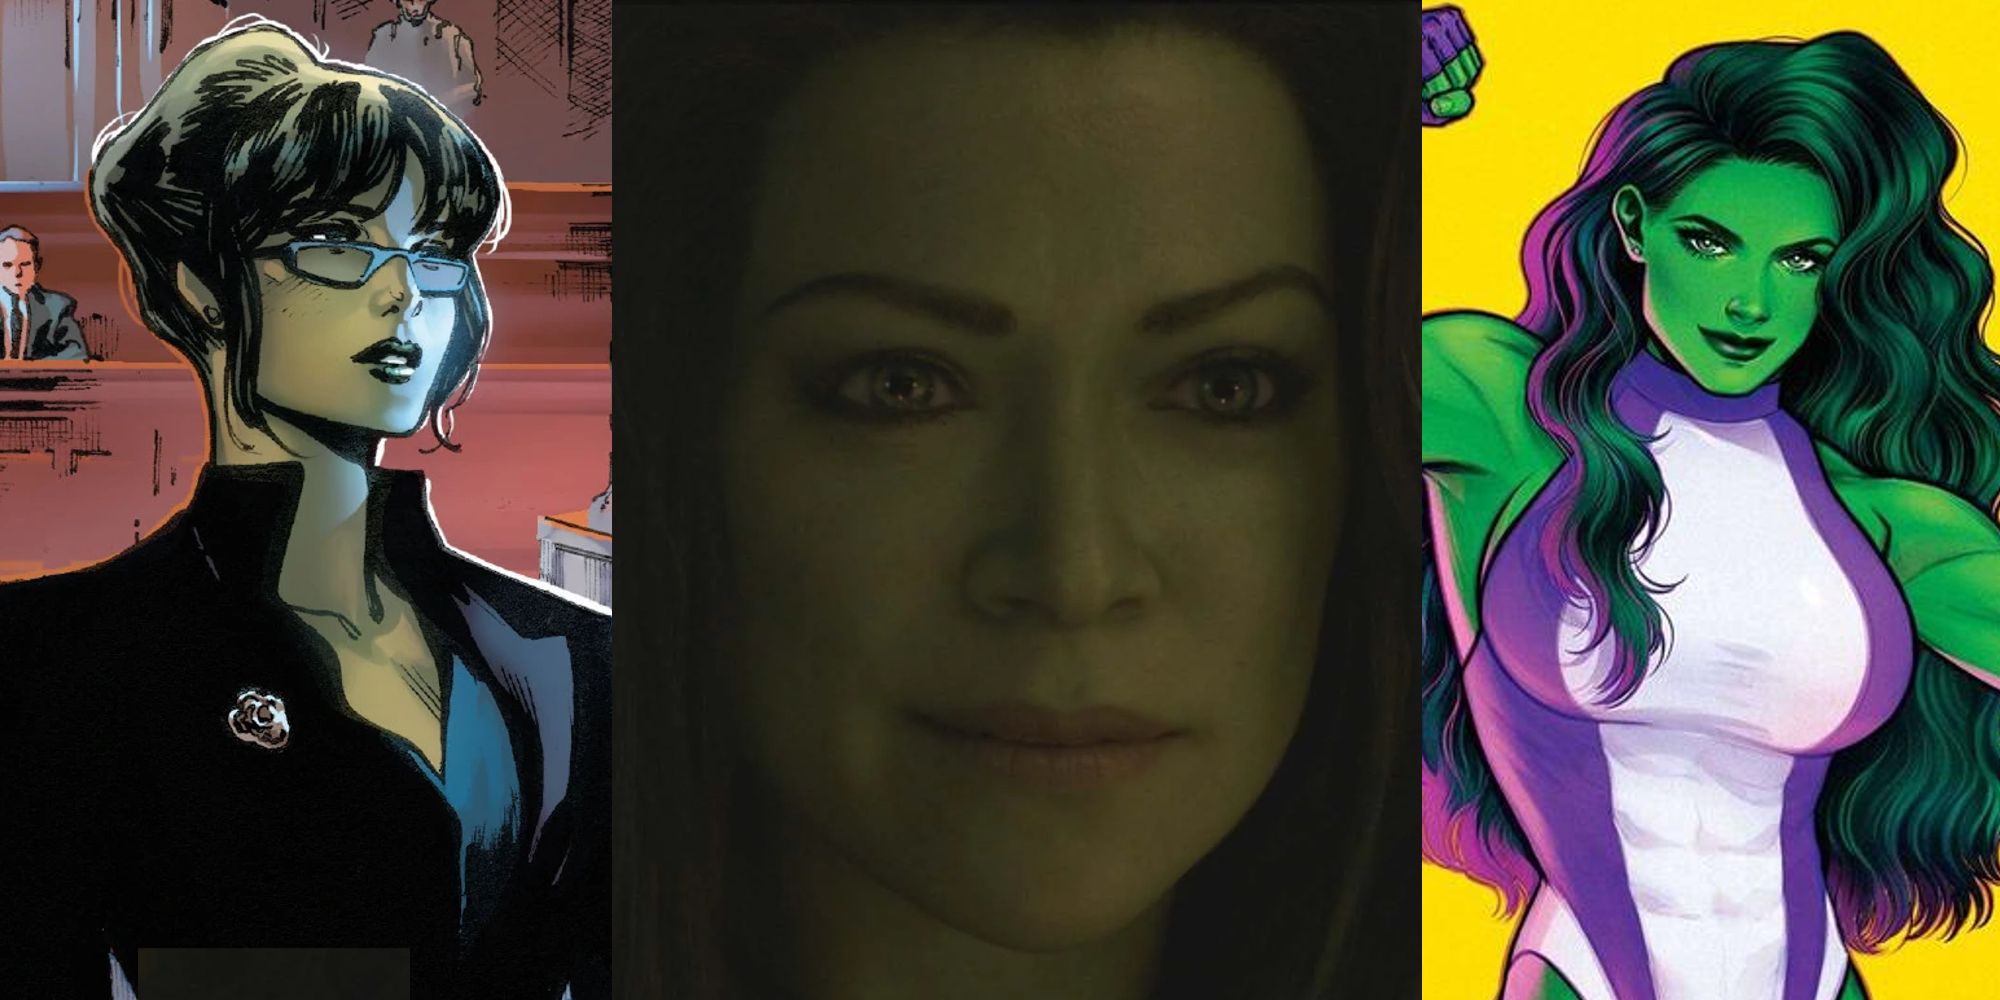 Jennifer Walters as a lawyer in Civil War II; Tatiana Maslany on a date as She-Hulk in She-Hulk: Attorney at Law; She-Hulk in a comic cover for her 2022 series